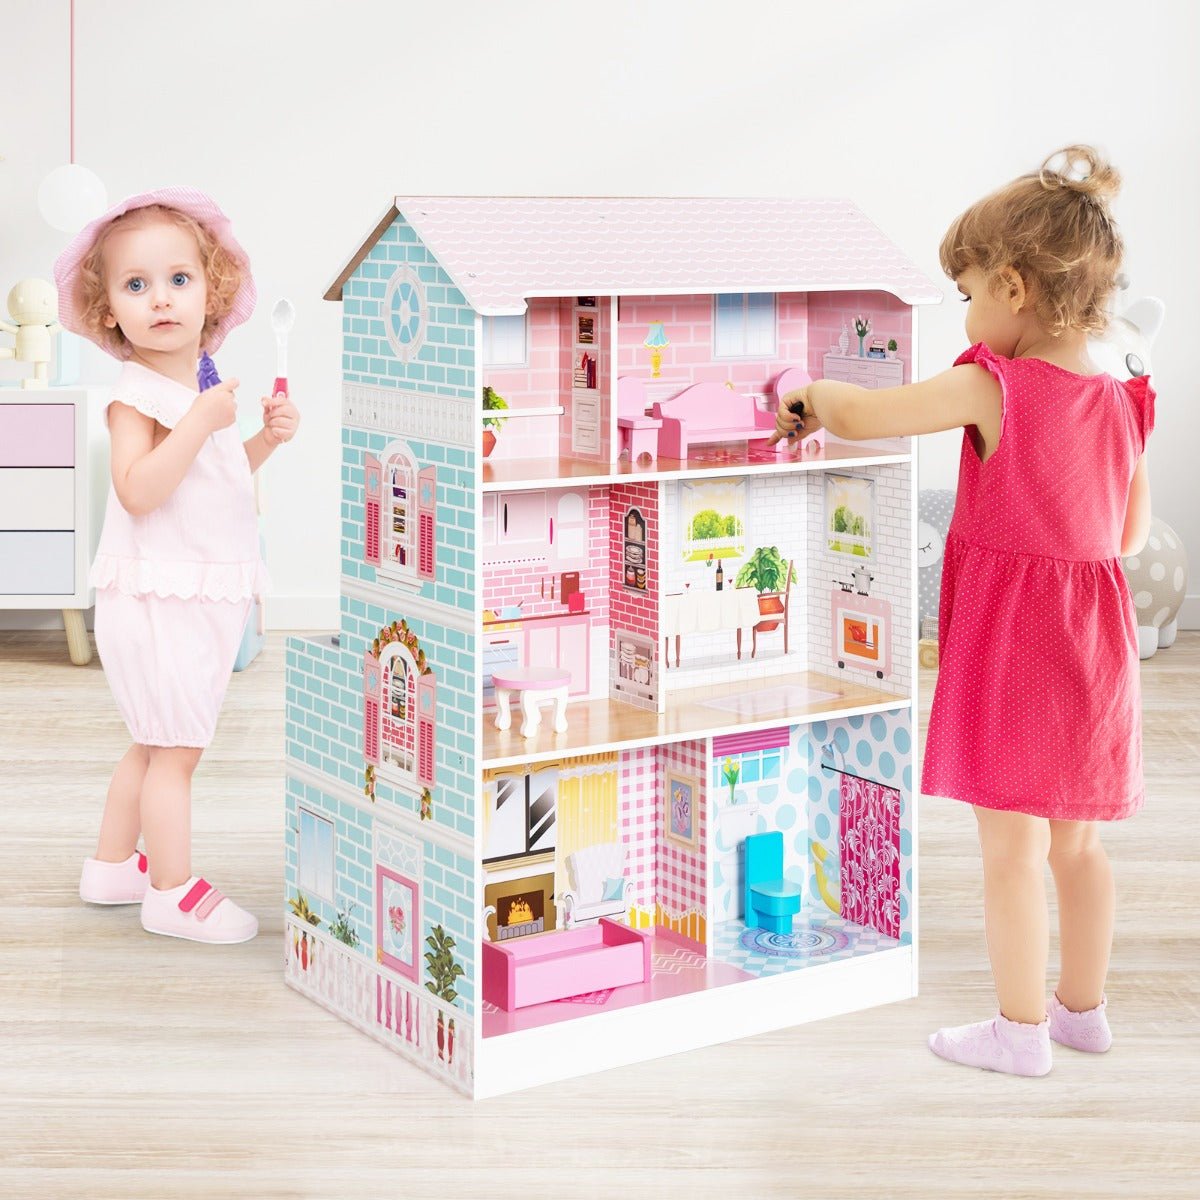 Whimsical Wooden Doll House and Play Kitchen: 2 in 1 Set with Accessories